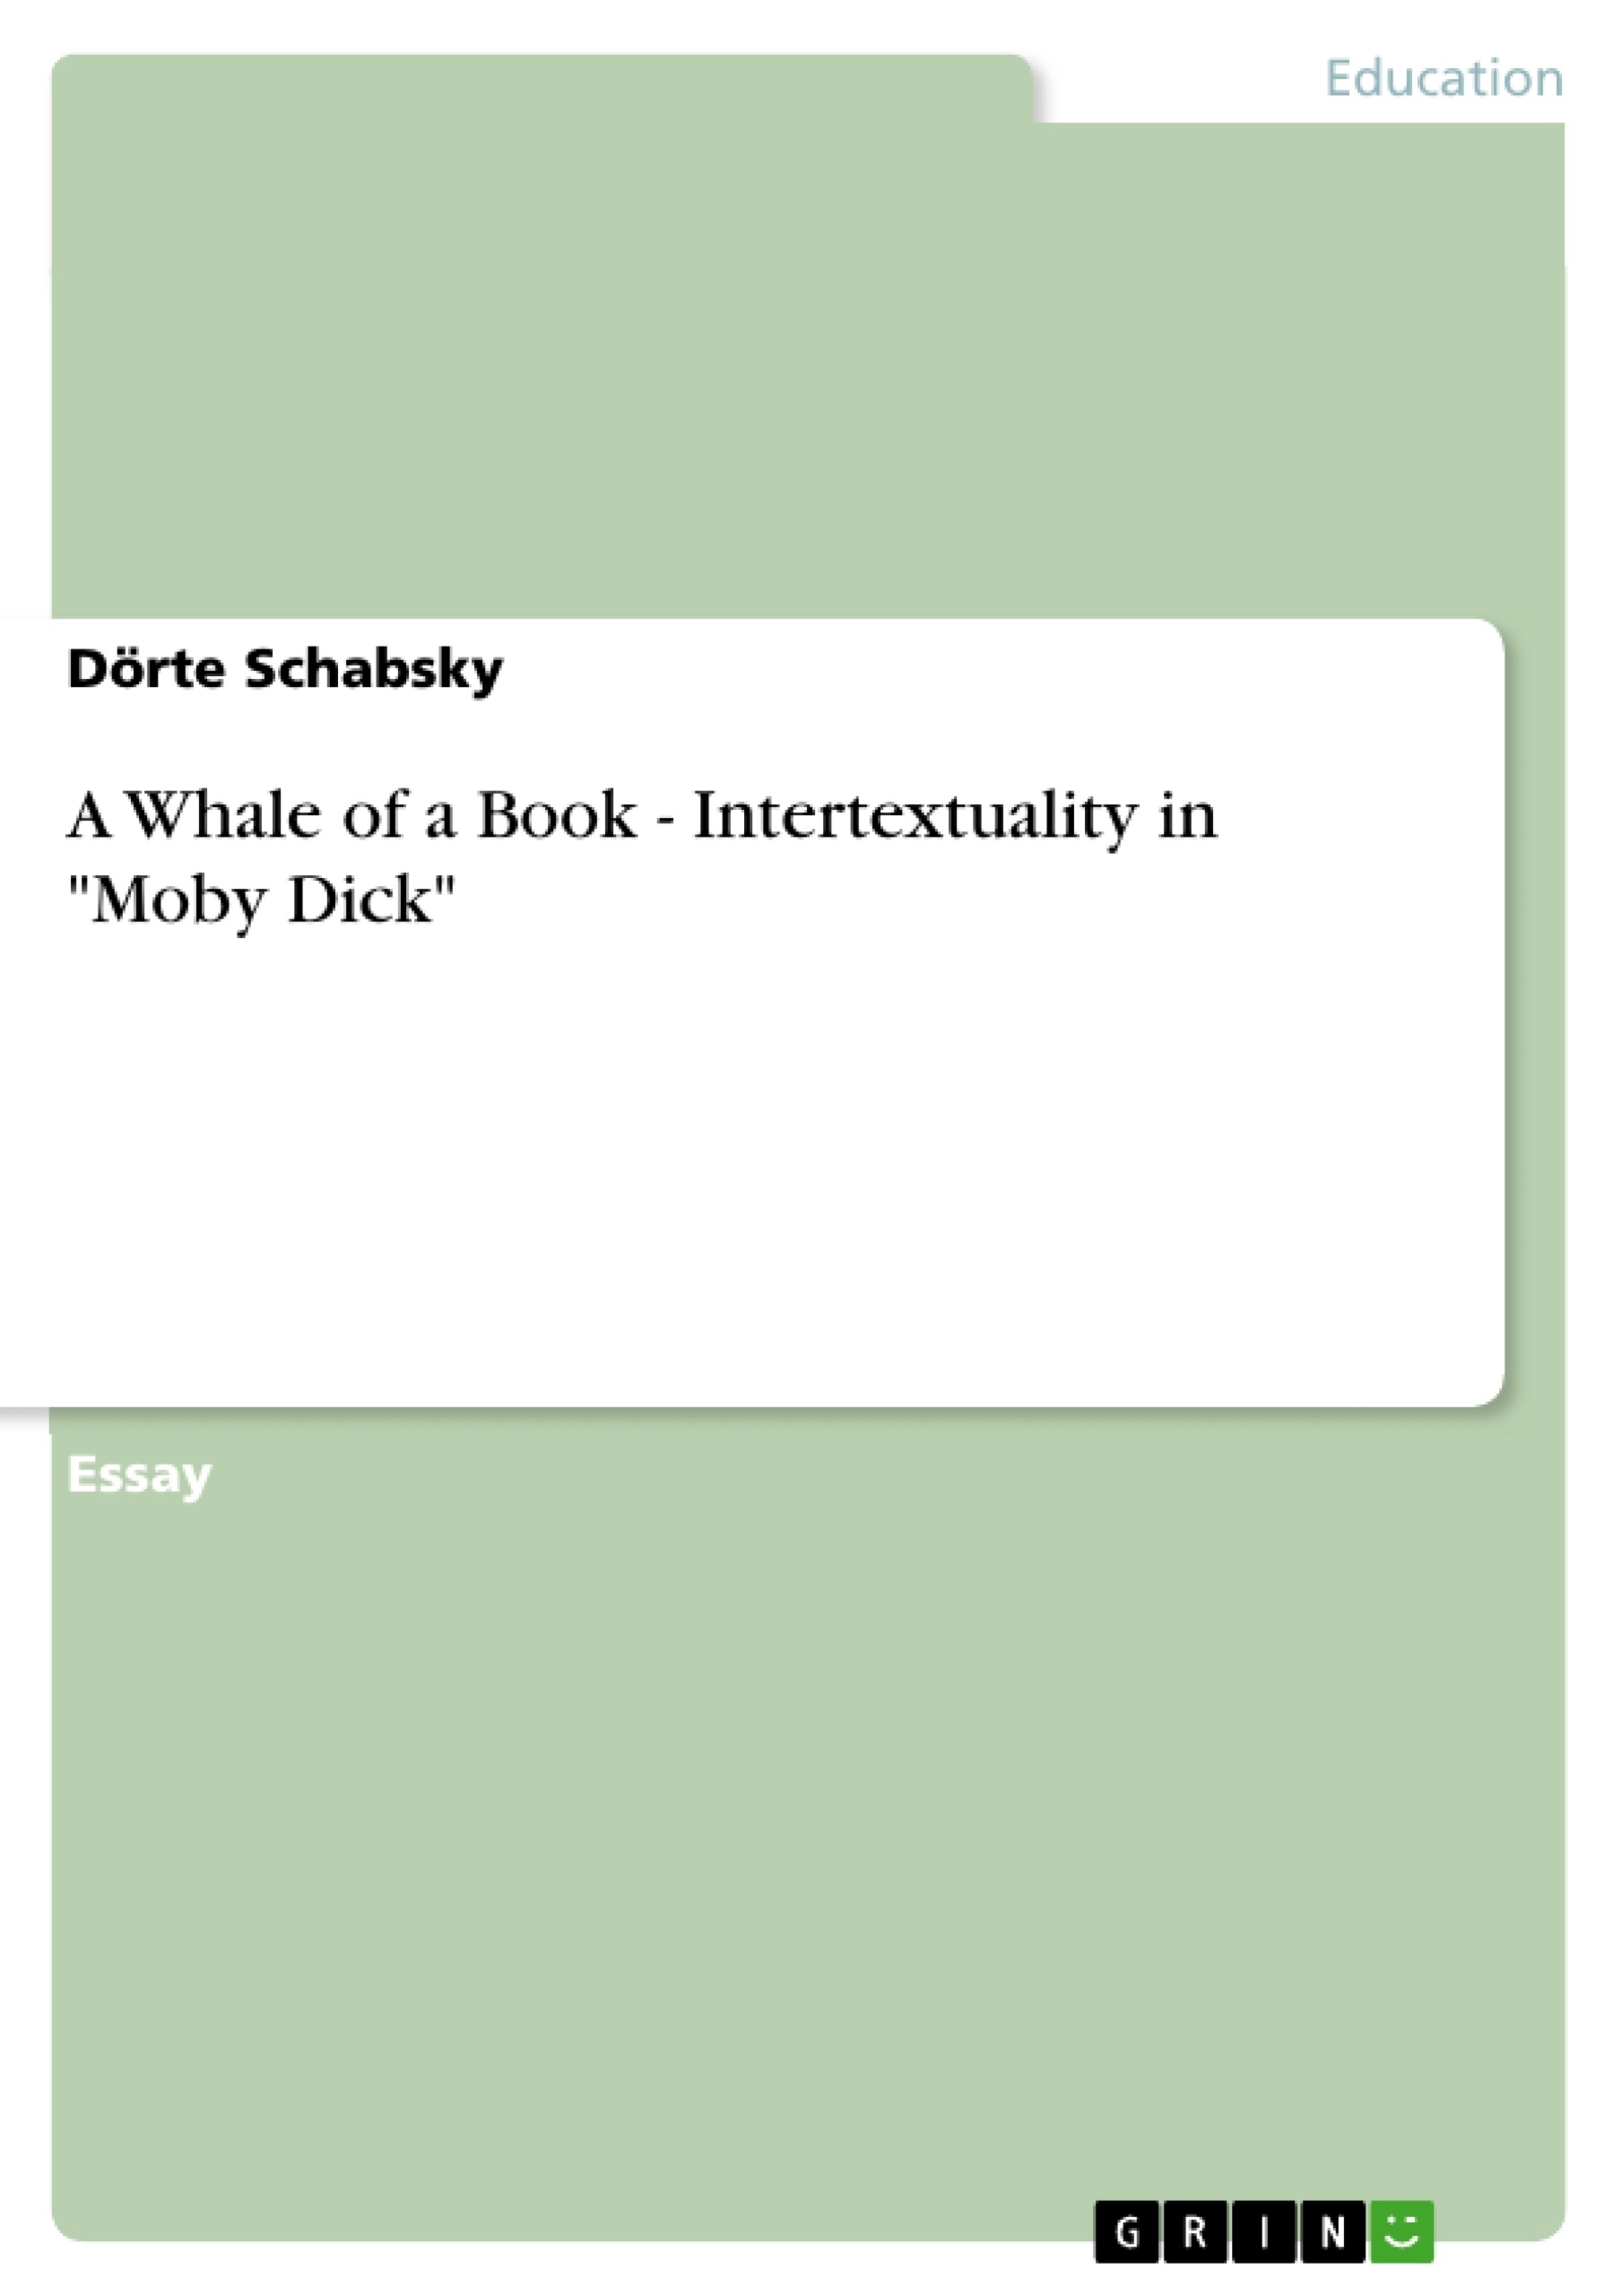 Titre: A Whale of a Book - Intertextuality in "Moby Dick"